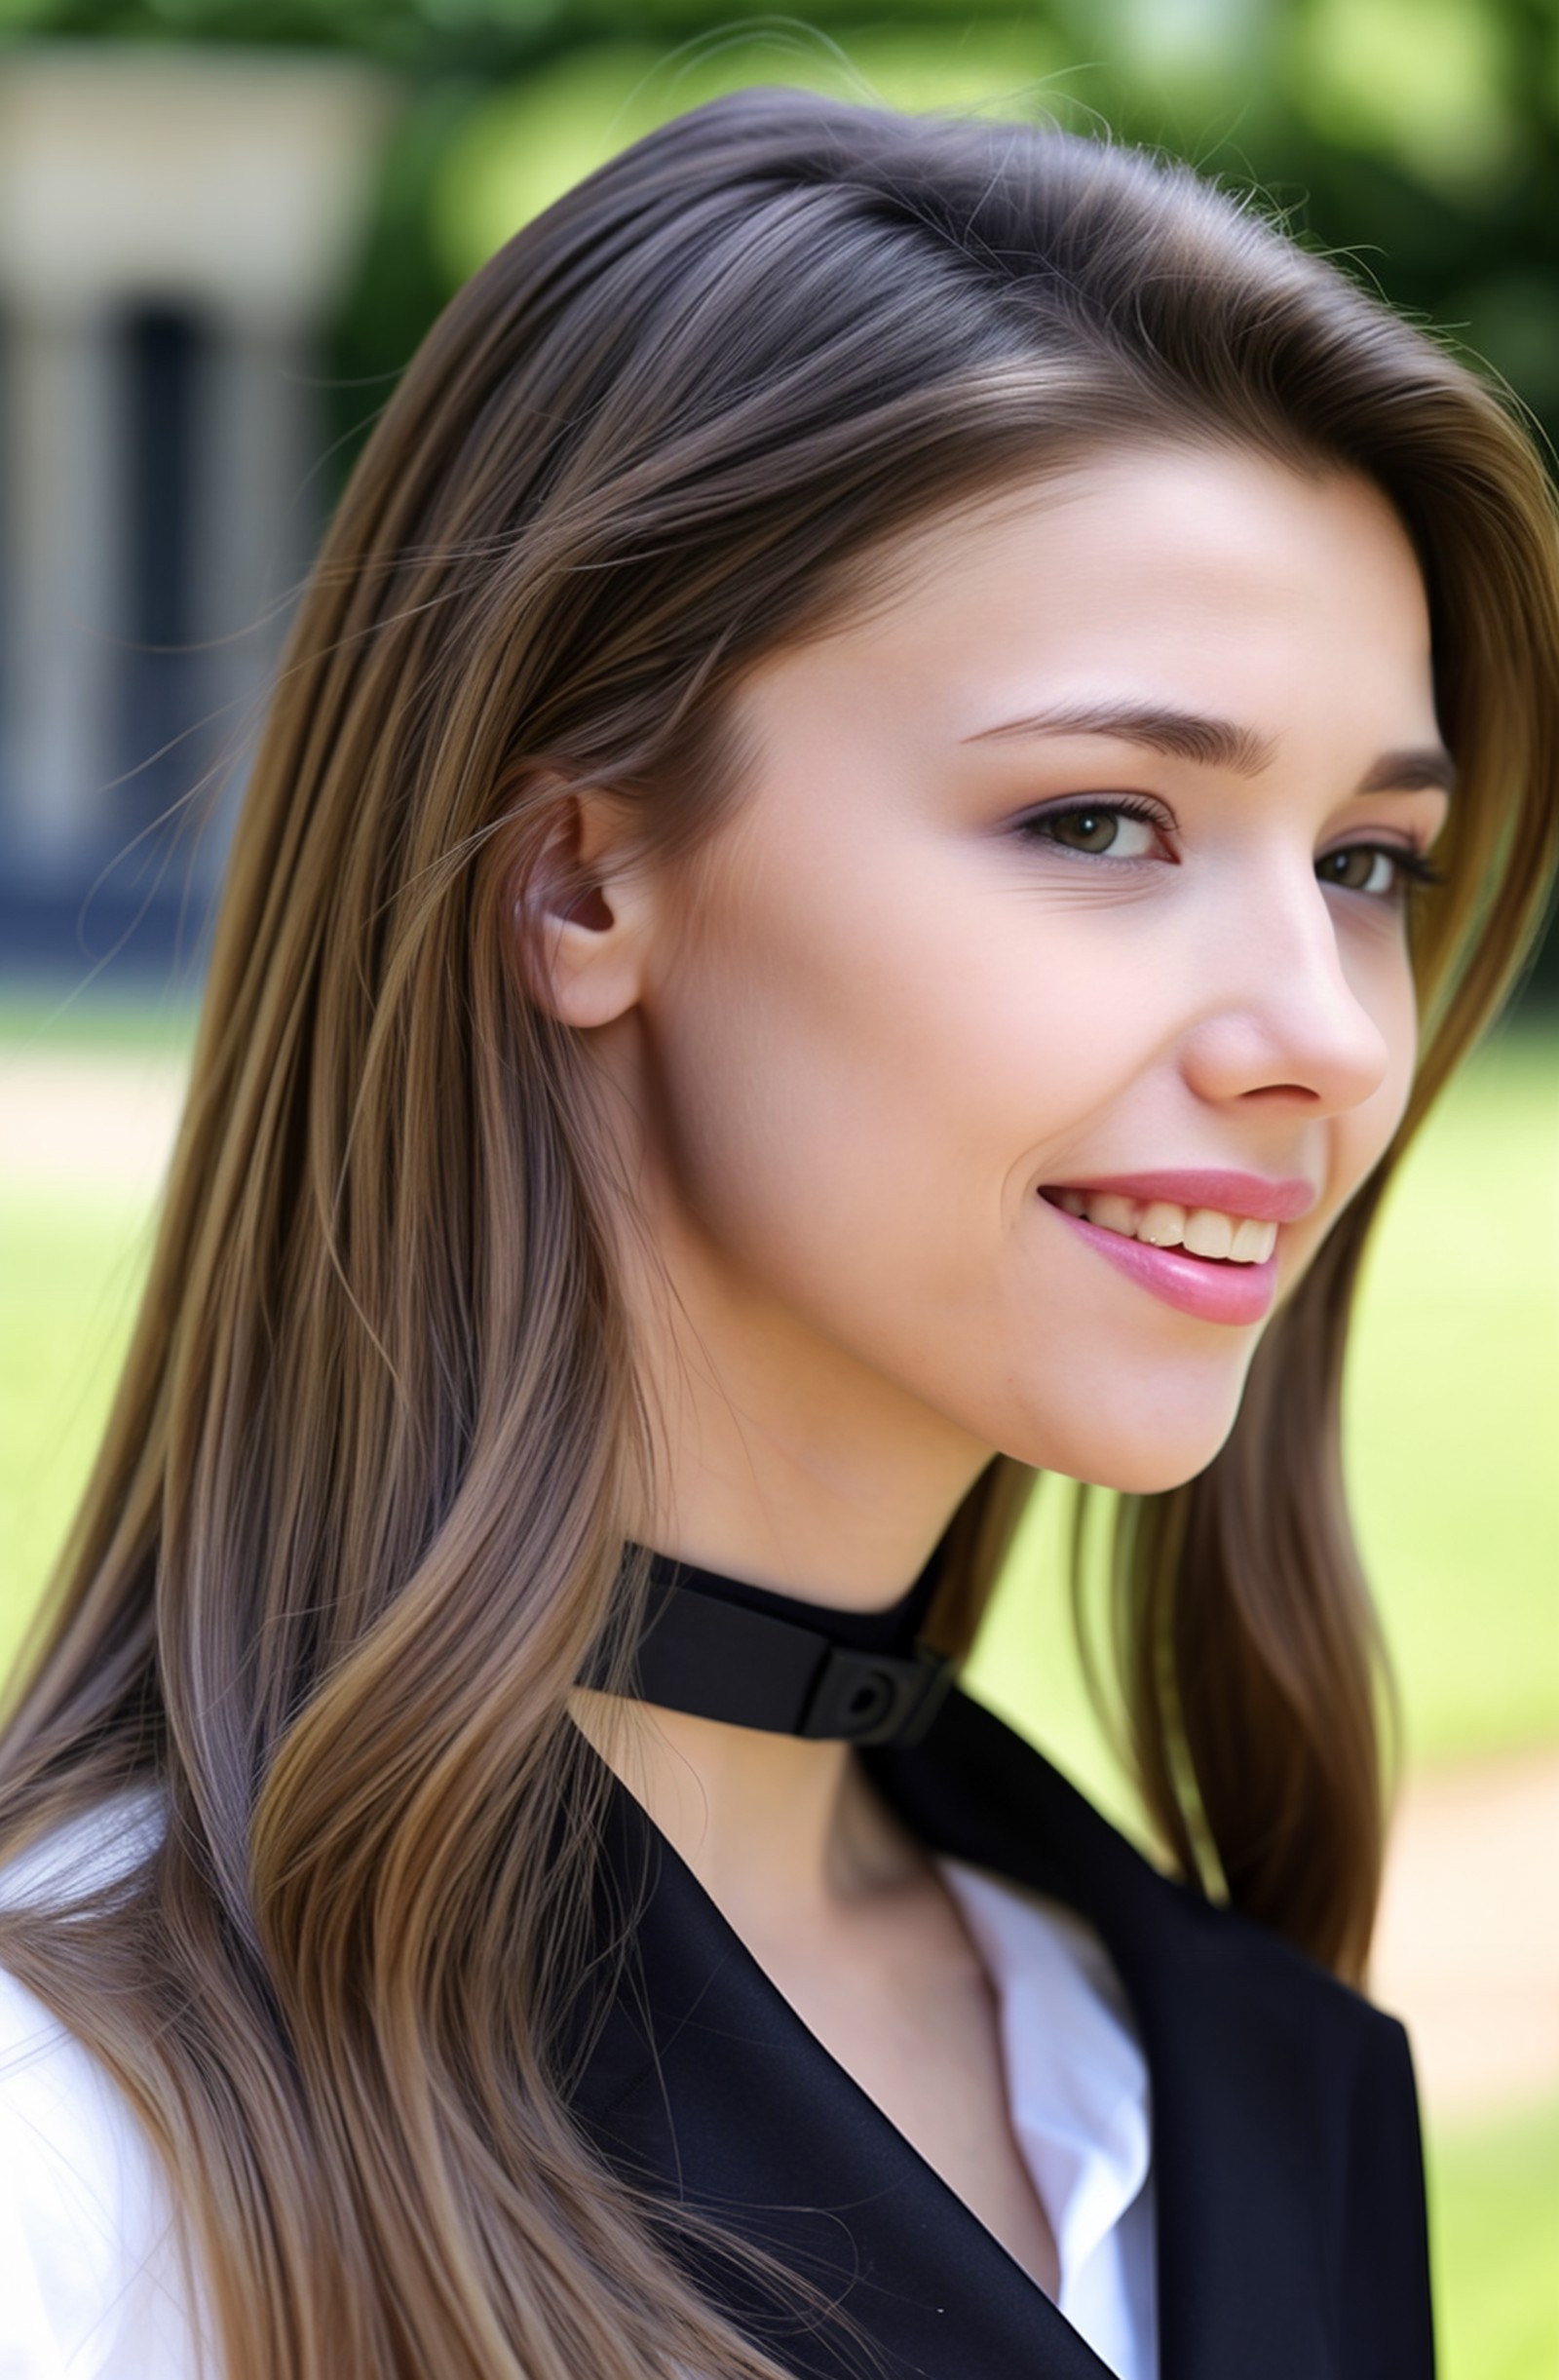 (from side ,profile) photo of a ukrainian woman named milaazul,<lyco:mila azul_V1:0.85>,Wearing a black collar,Face close-...